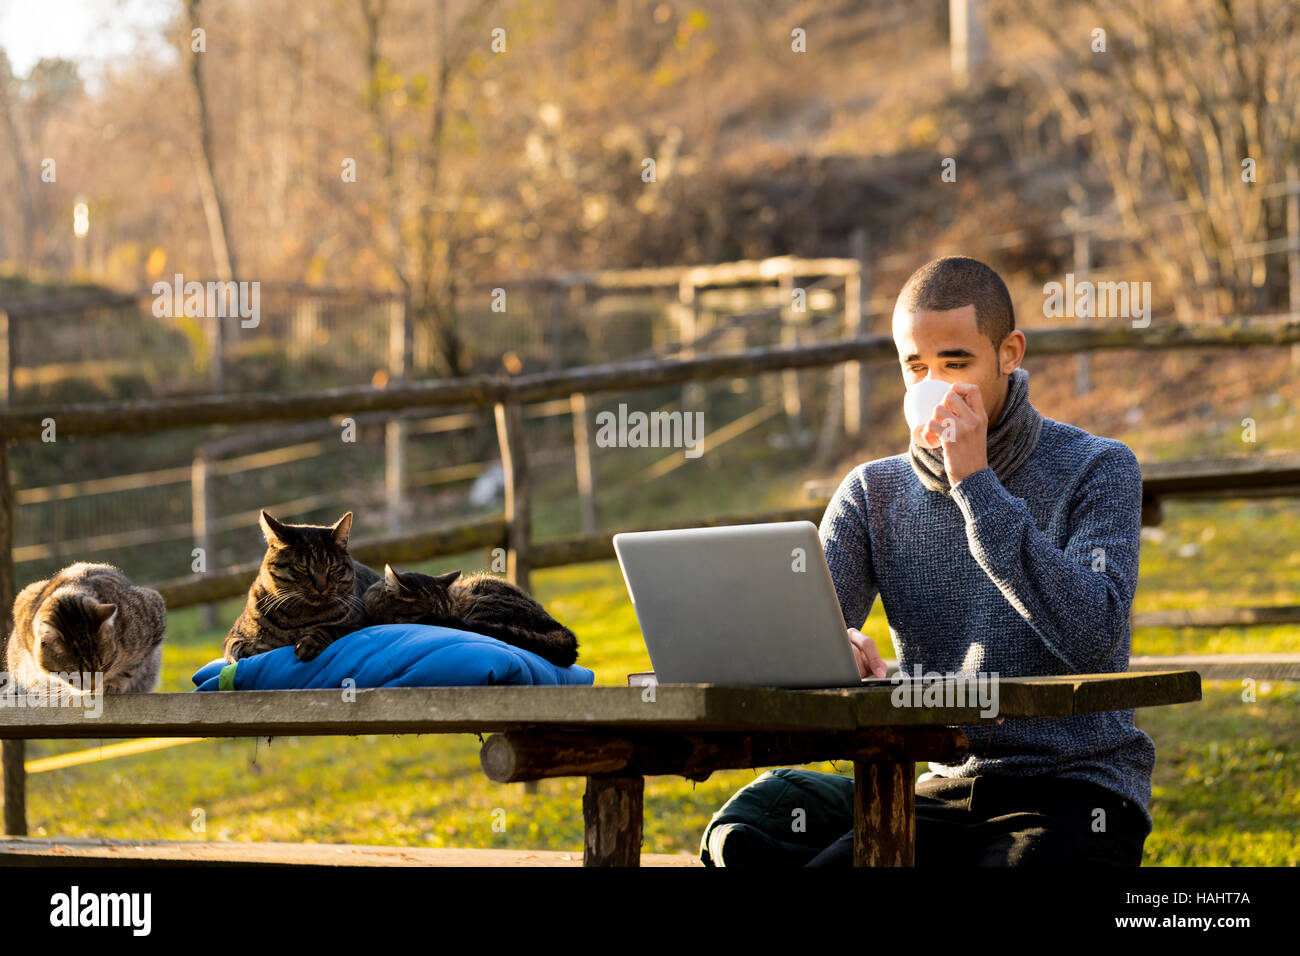 freelance business man drinking his coffee and working at his laptop outdoors in good company of three cats Stock Photo